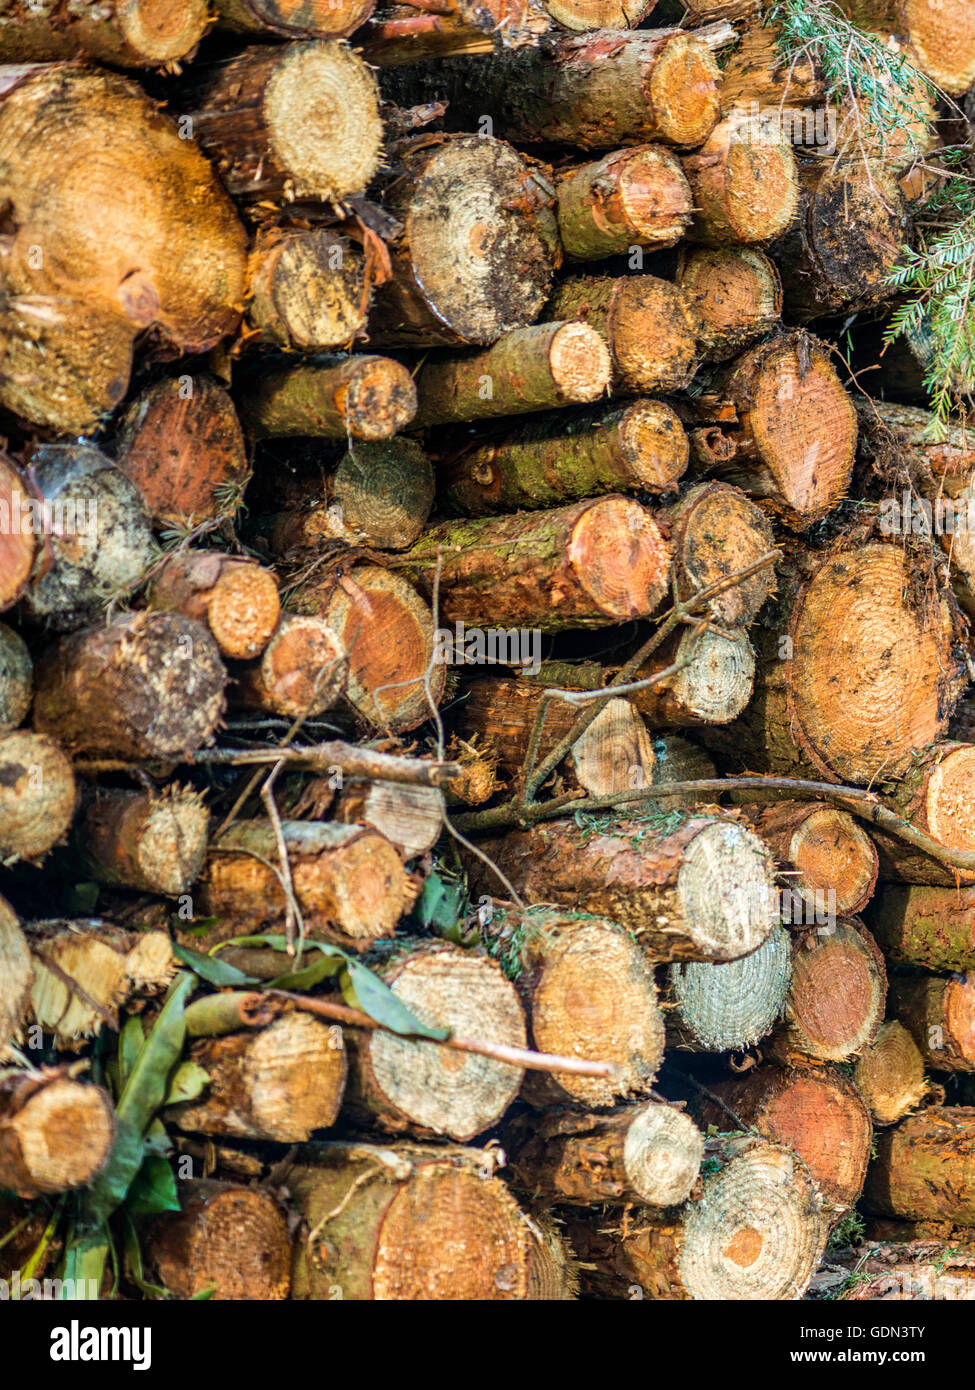 Close up image depicting recently felled trees stacked in log piles, focusing on the form and shape of the exposed trunk. Stock Photo